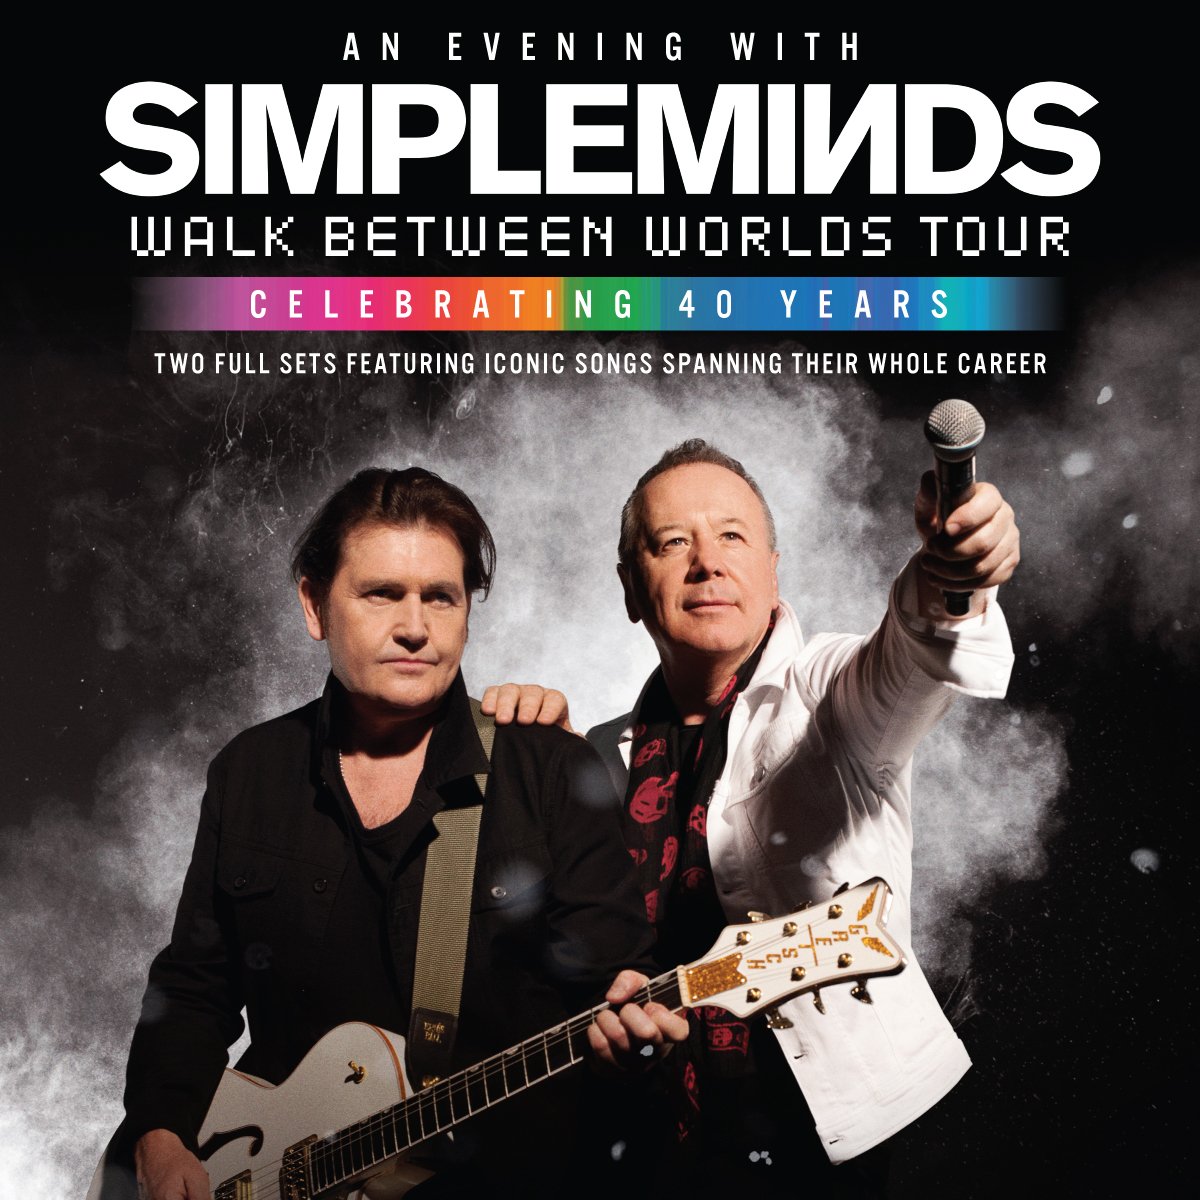 Simple Minds celebrate 40 years with careerspanning North American